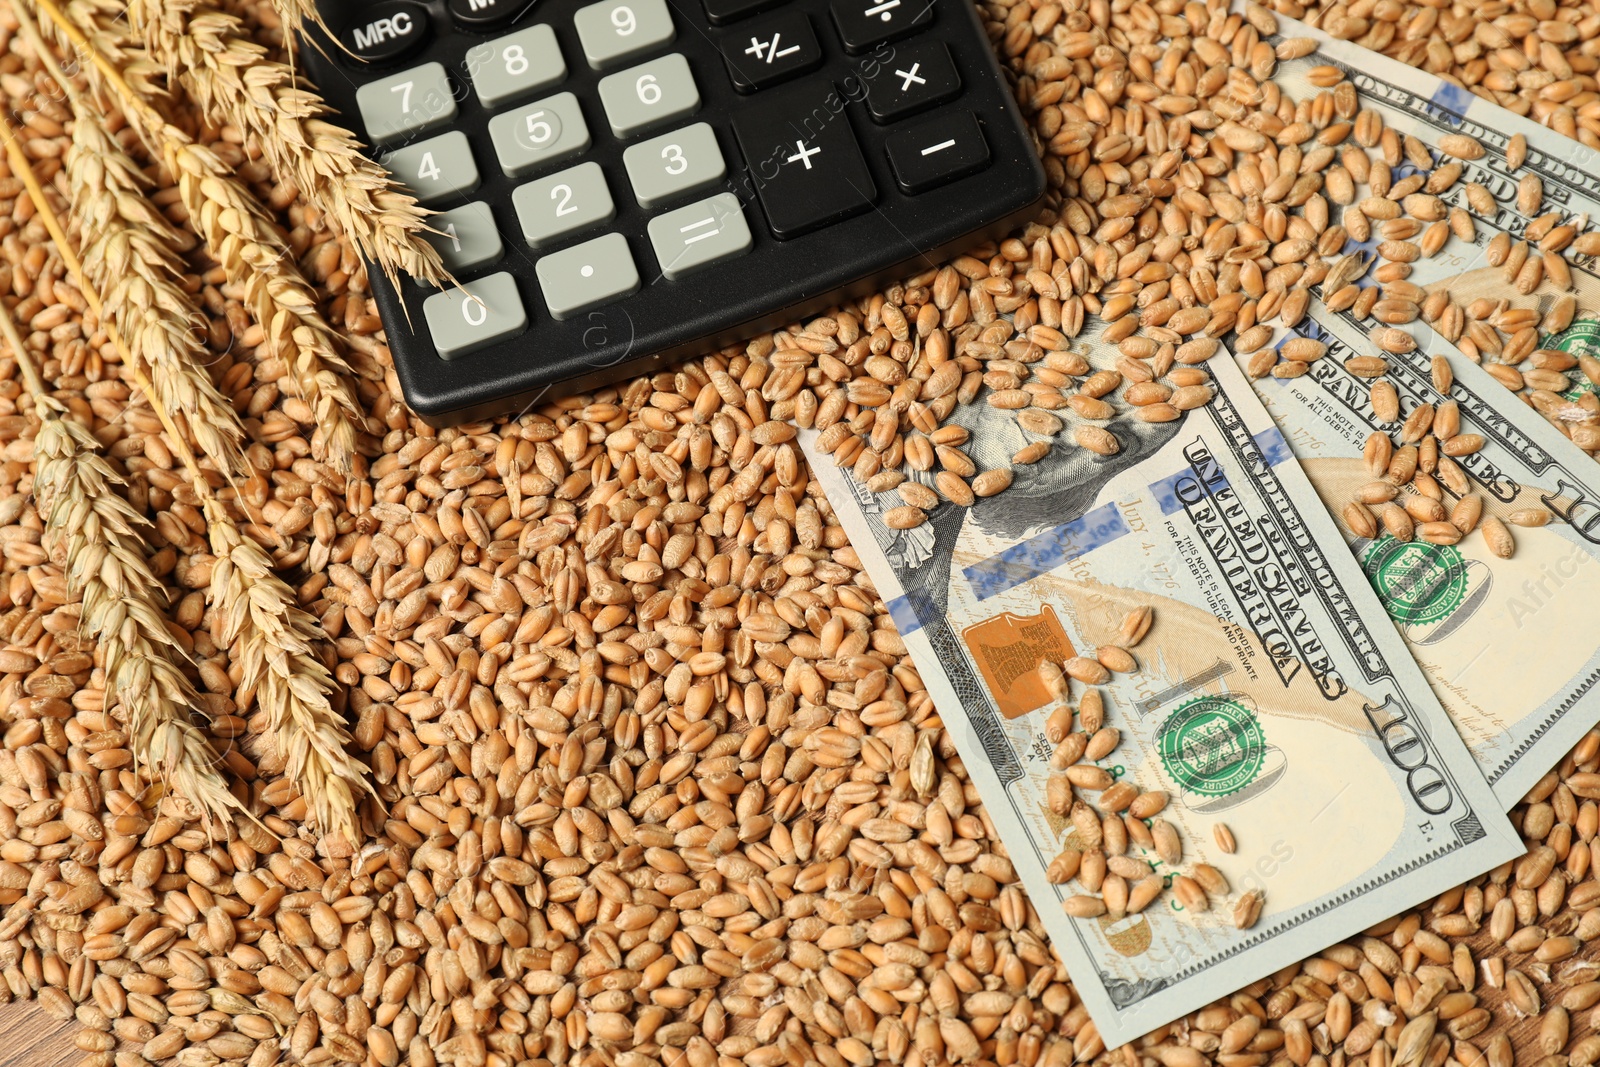 Photo of Dollar banknotes, calculator and wheat ears on grains, above view. Agricultural business